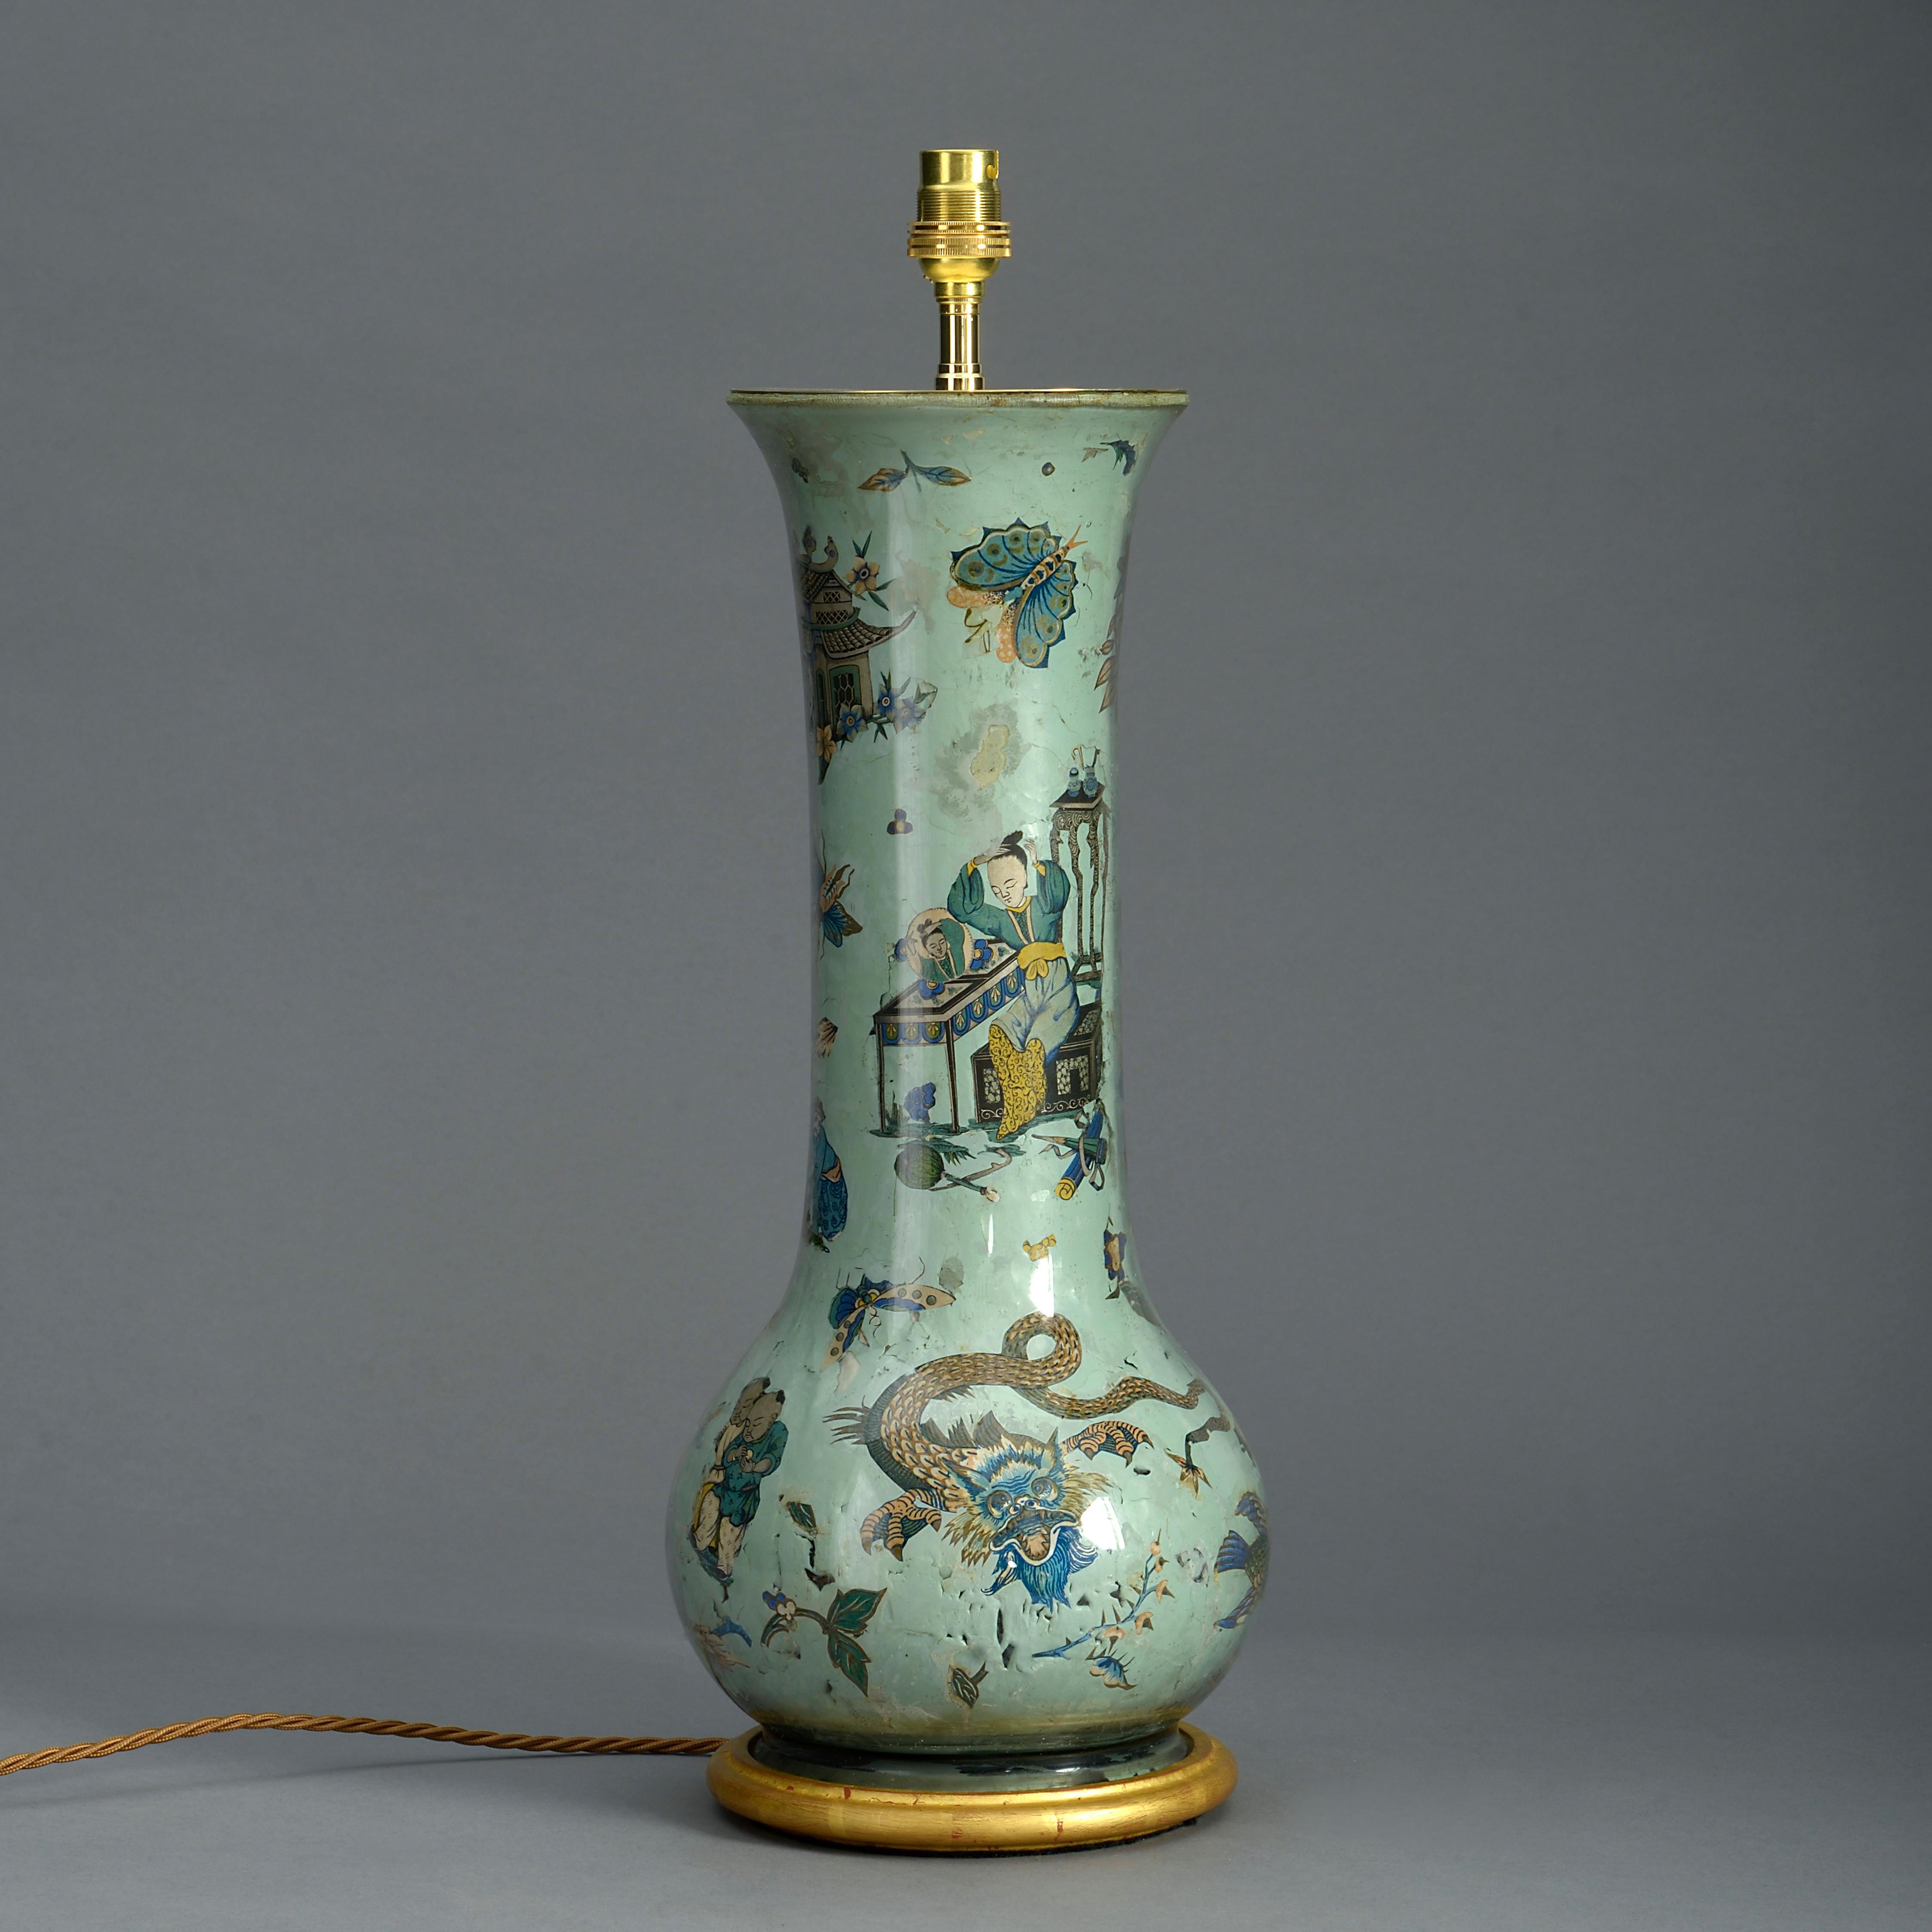 A 19th century tall Decalcomania glass trumpet vase of gourd form, decorated with polychrome chinoiseries upon a green ground. Now mounted on a turned giltwood base as a lamp.

Dimensions refer to vase and base only.

Not including shade.